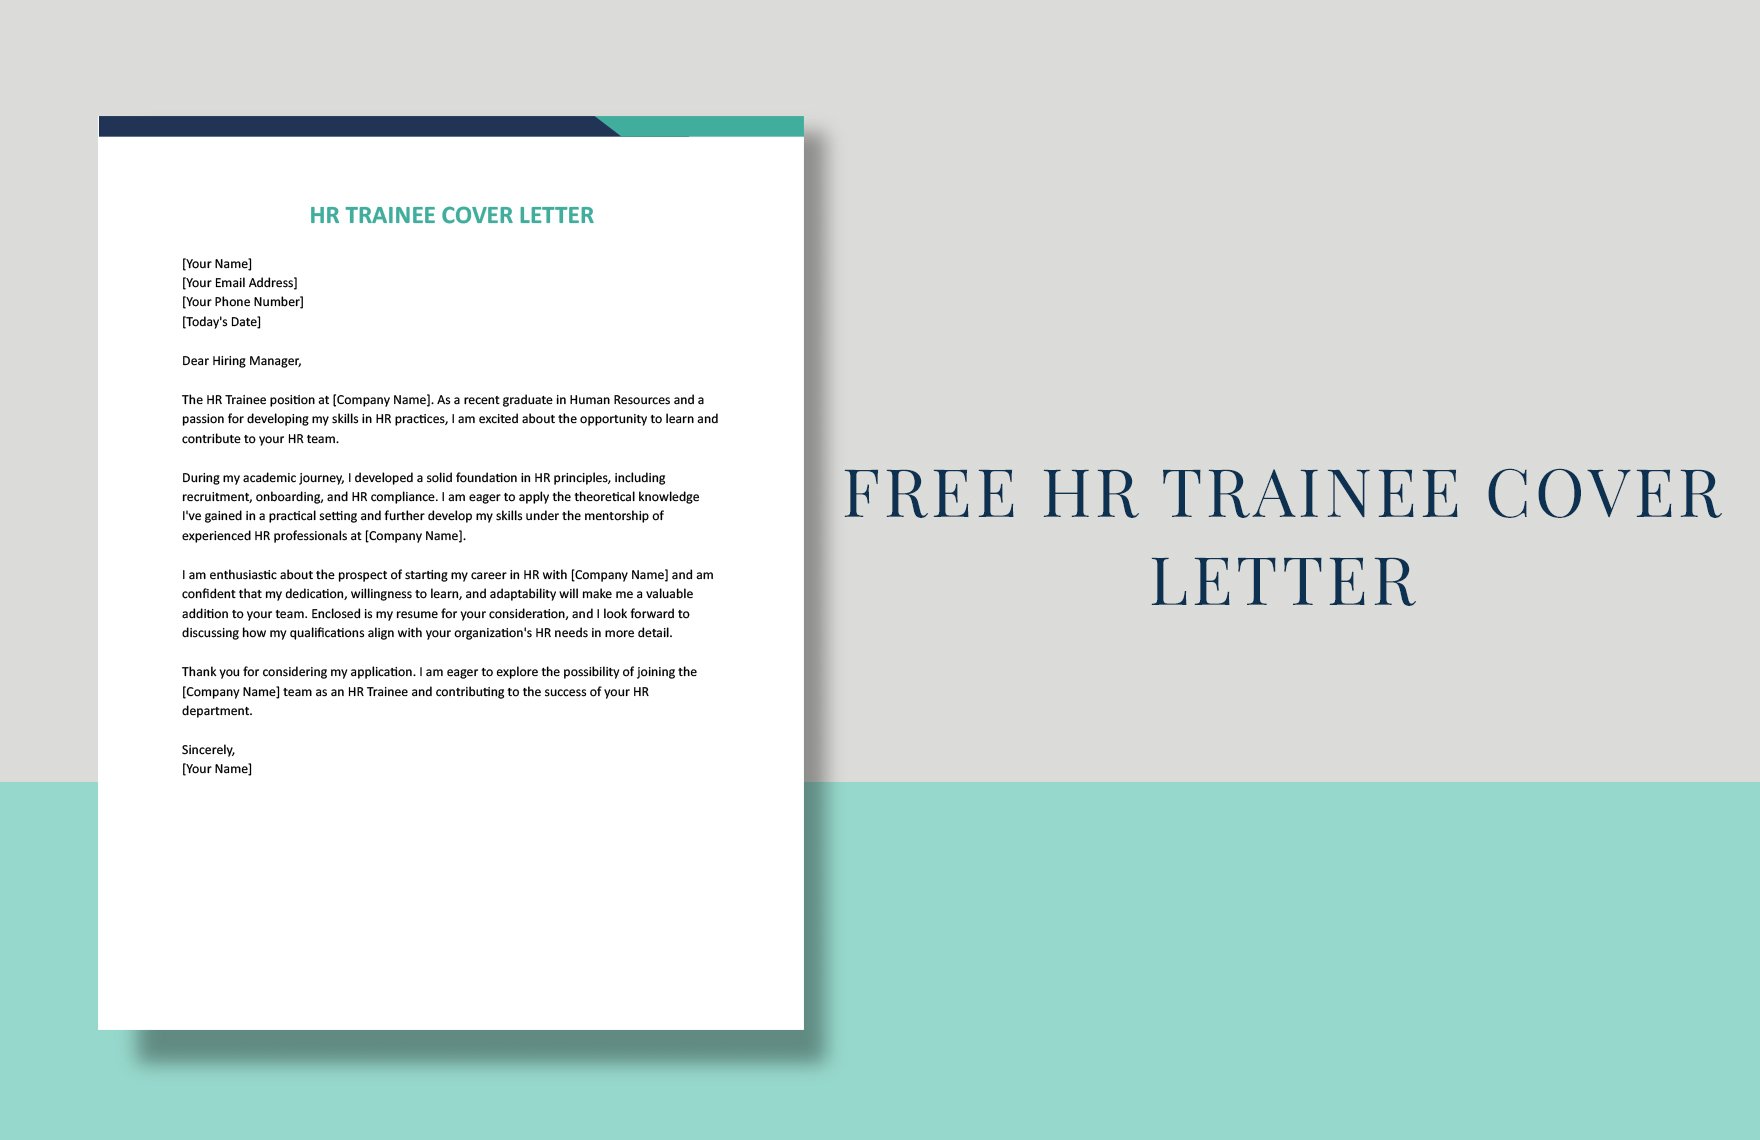 HR Trainee Cover Letter